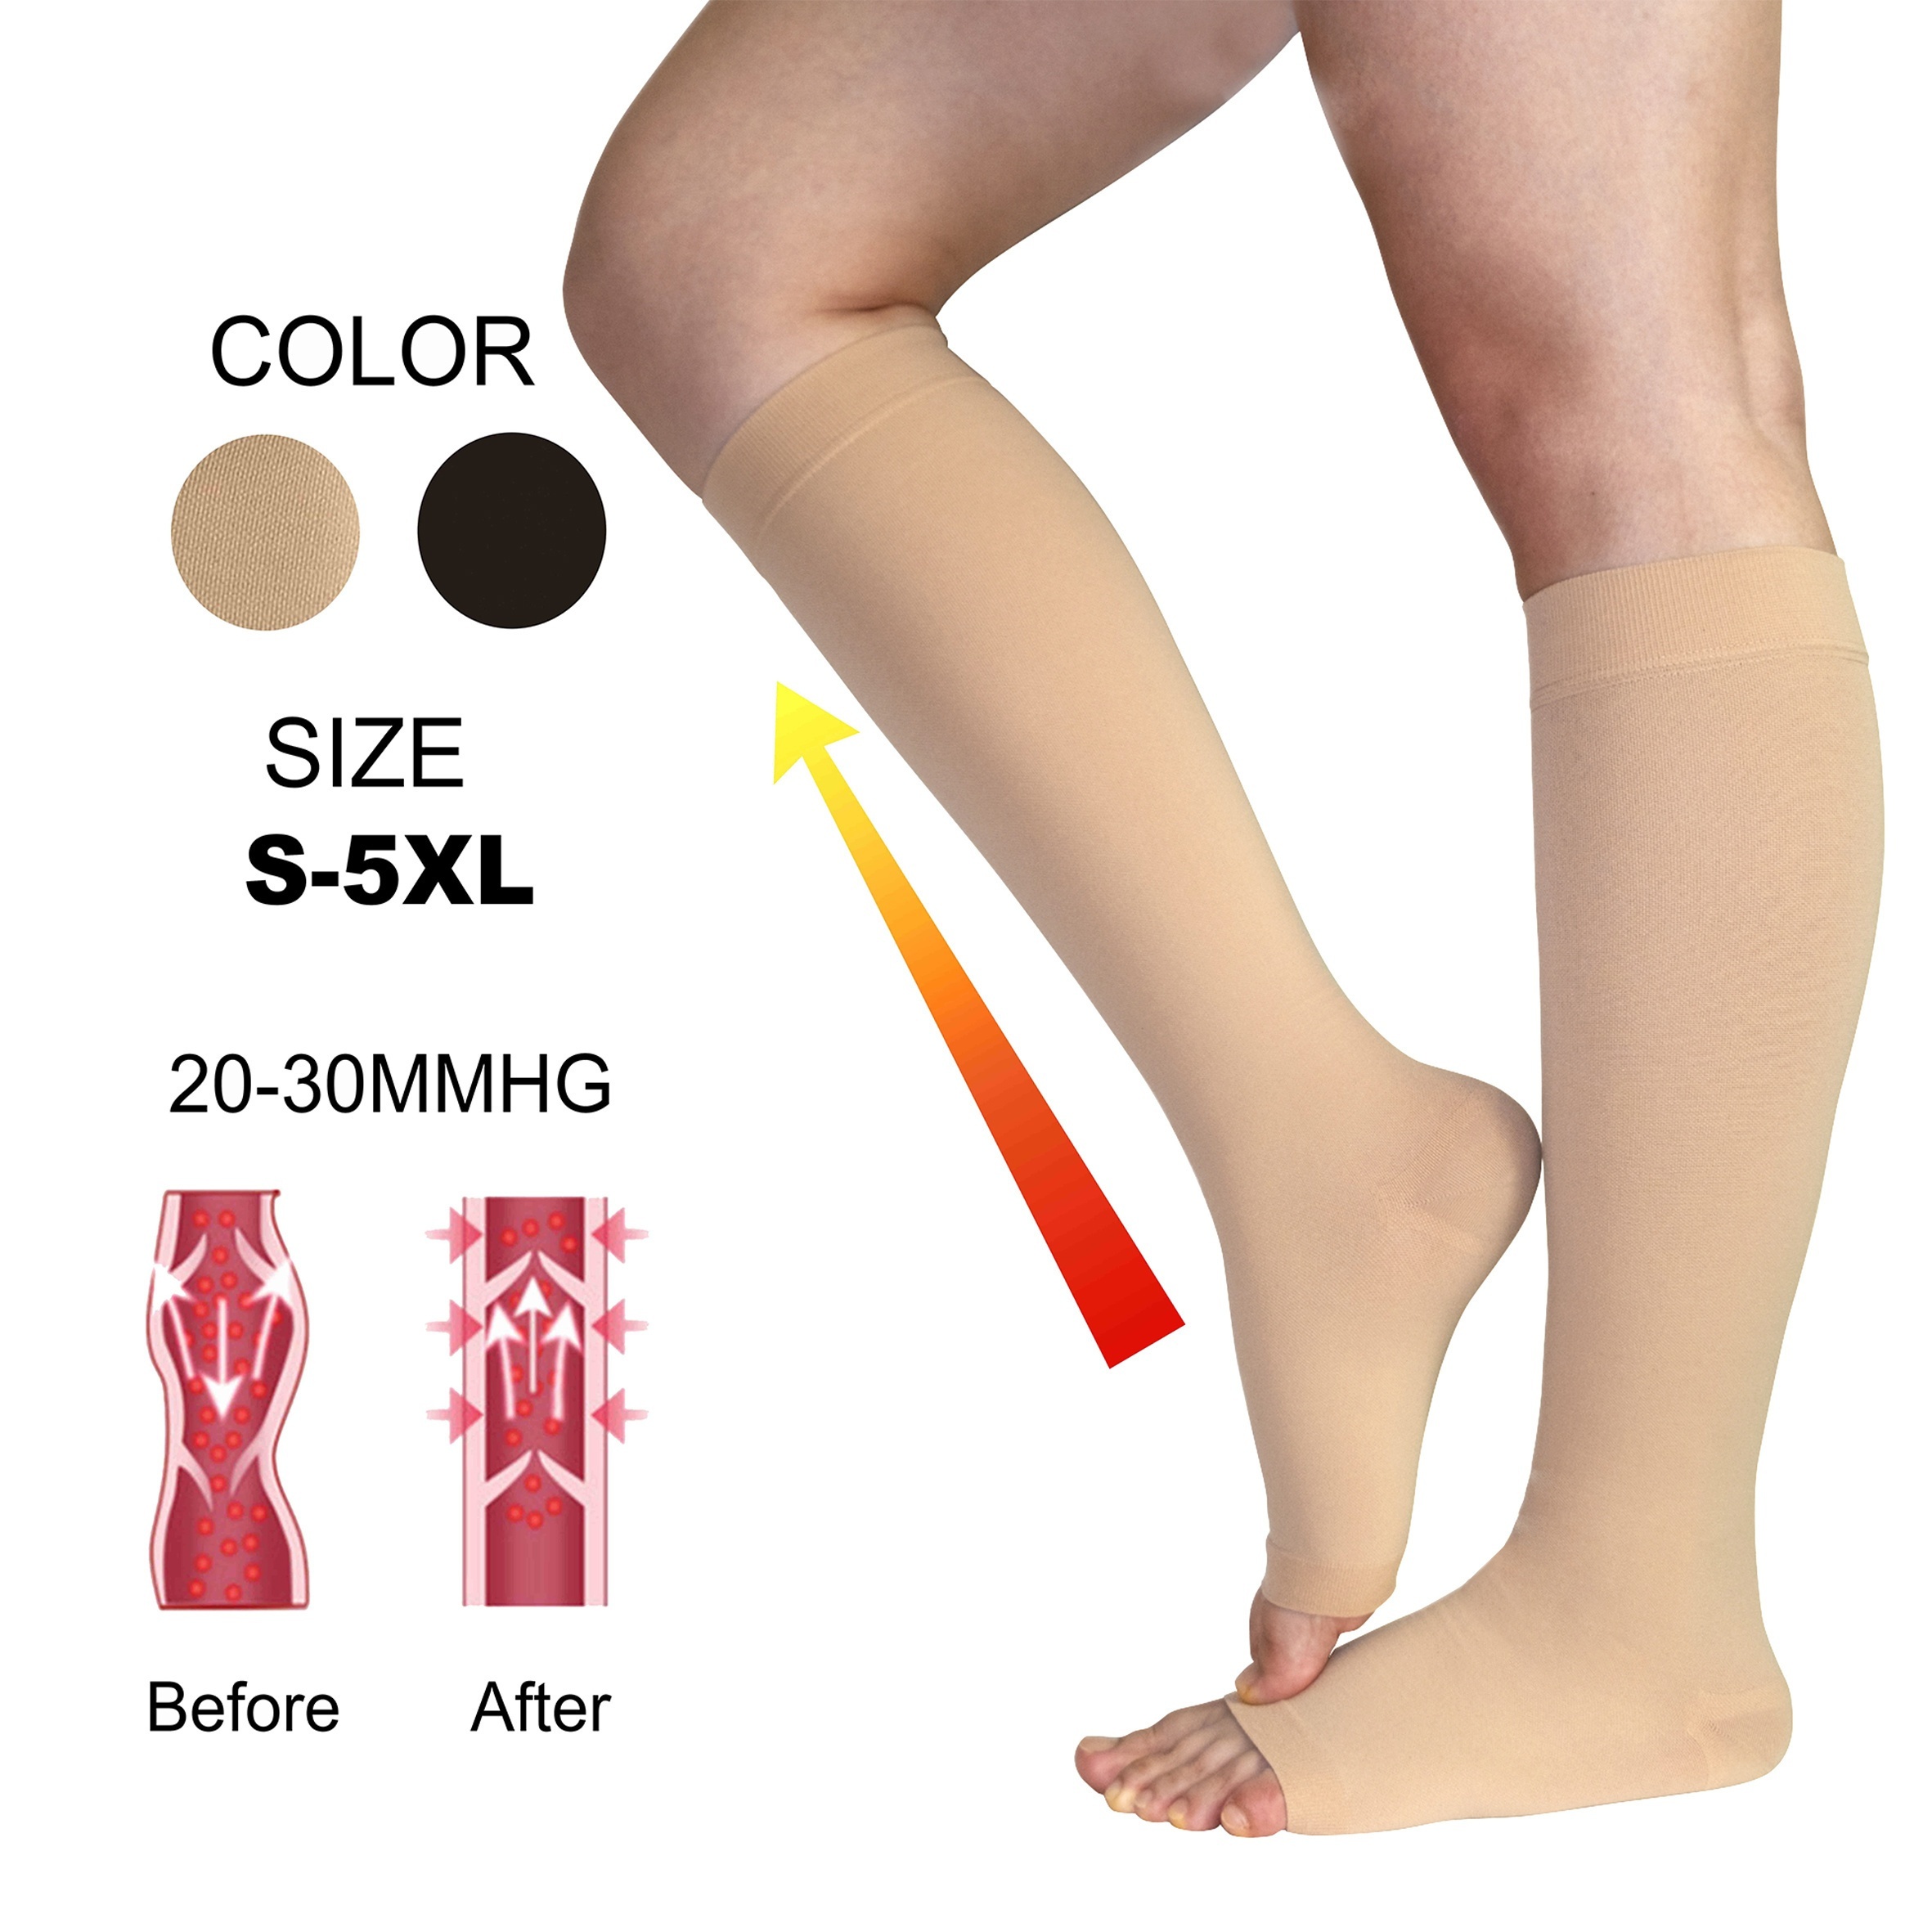 Womens Graduated Compression Socks 20-30 Elastic Support Stockings Varices